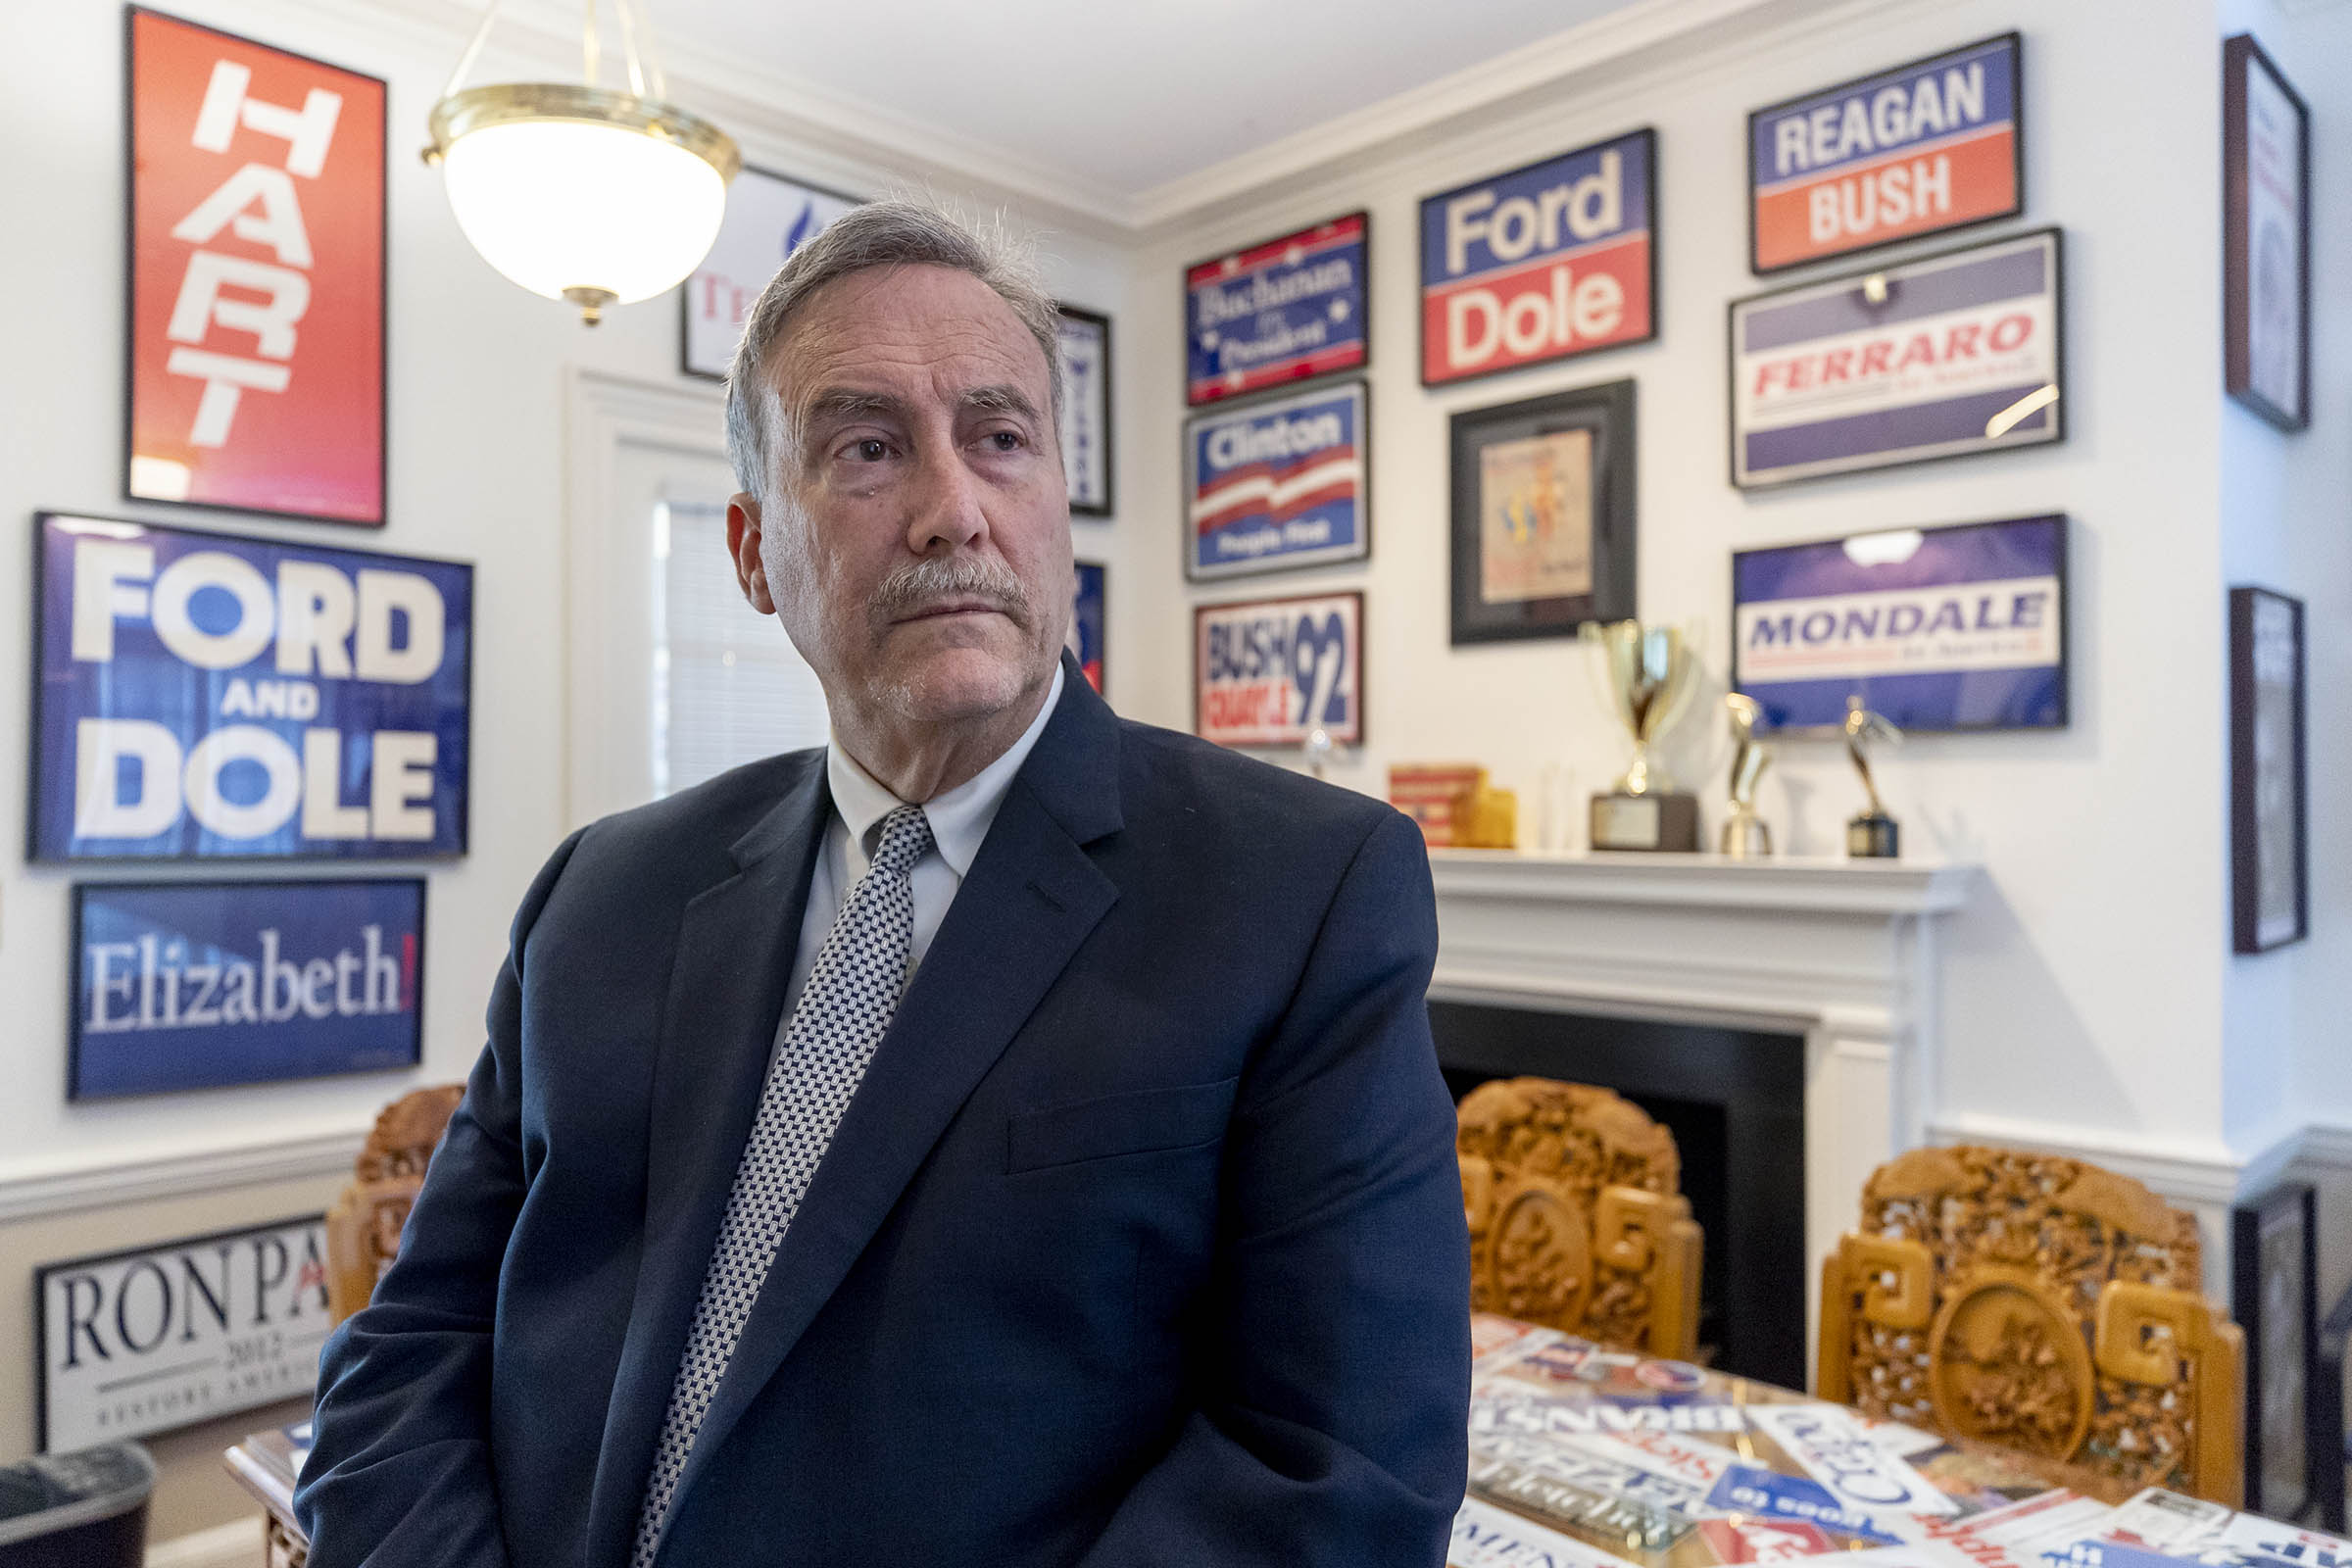 Larry Sabato leaning on table 